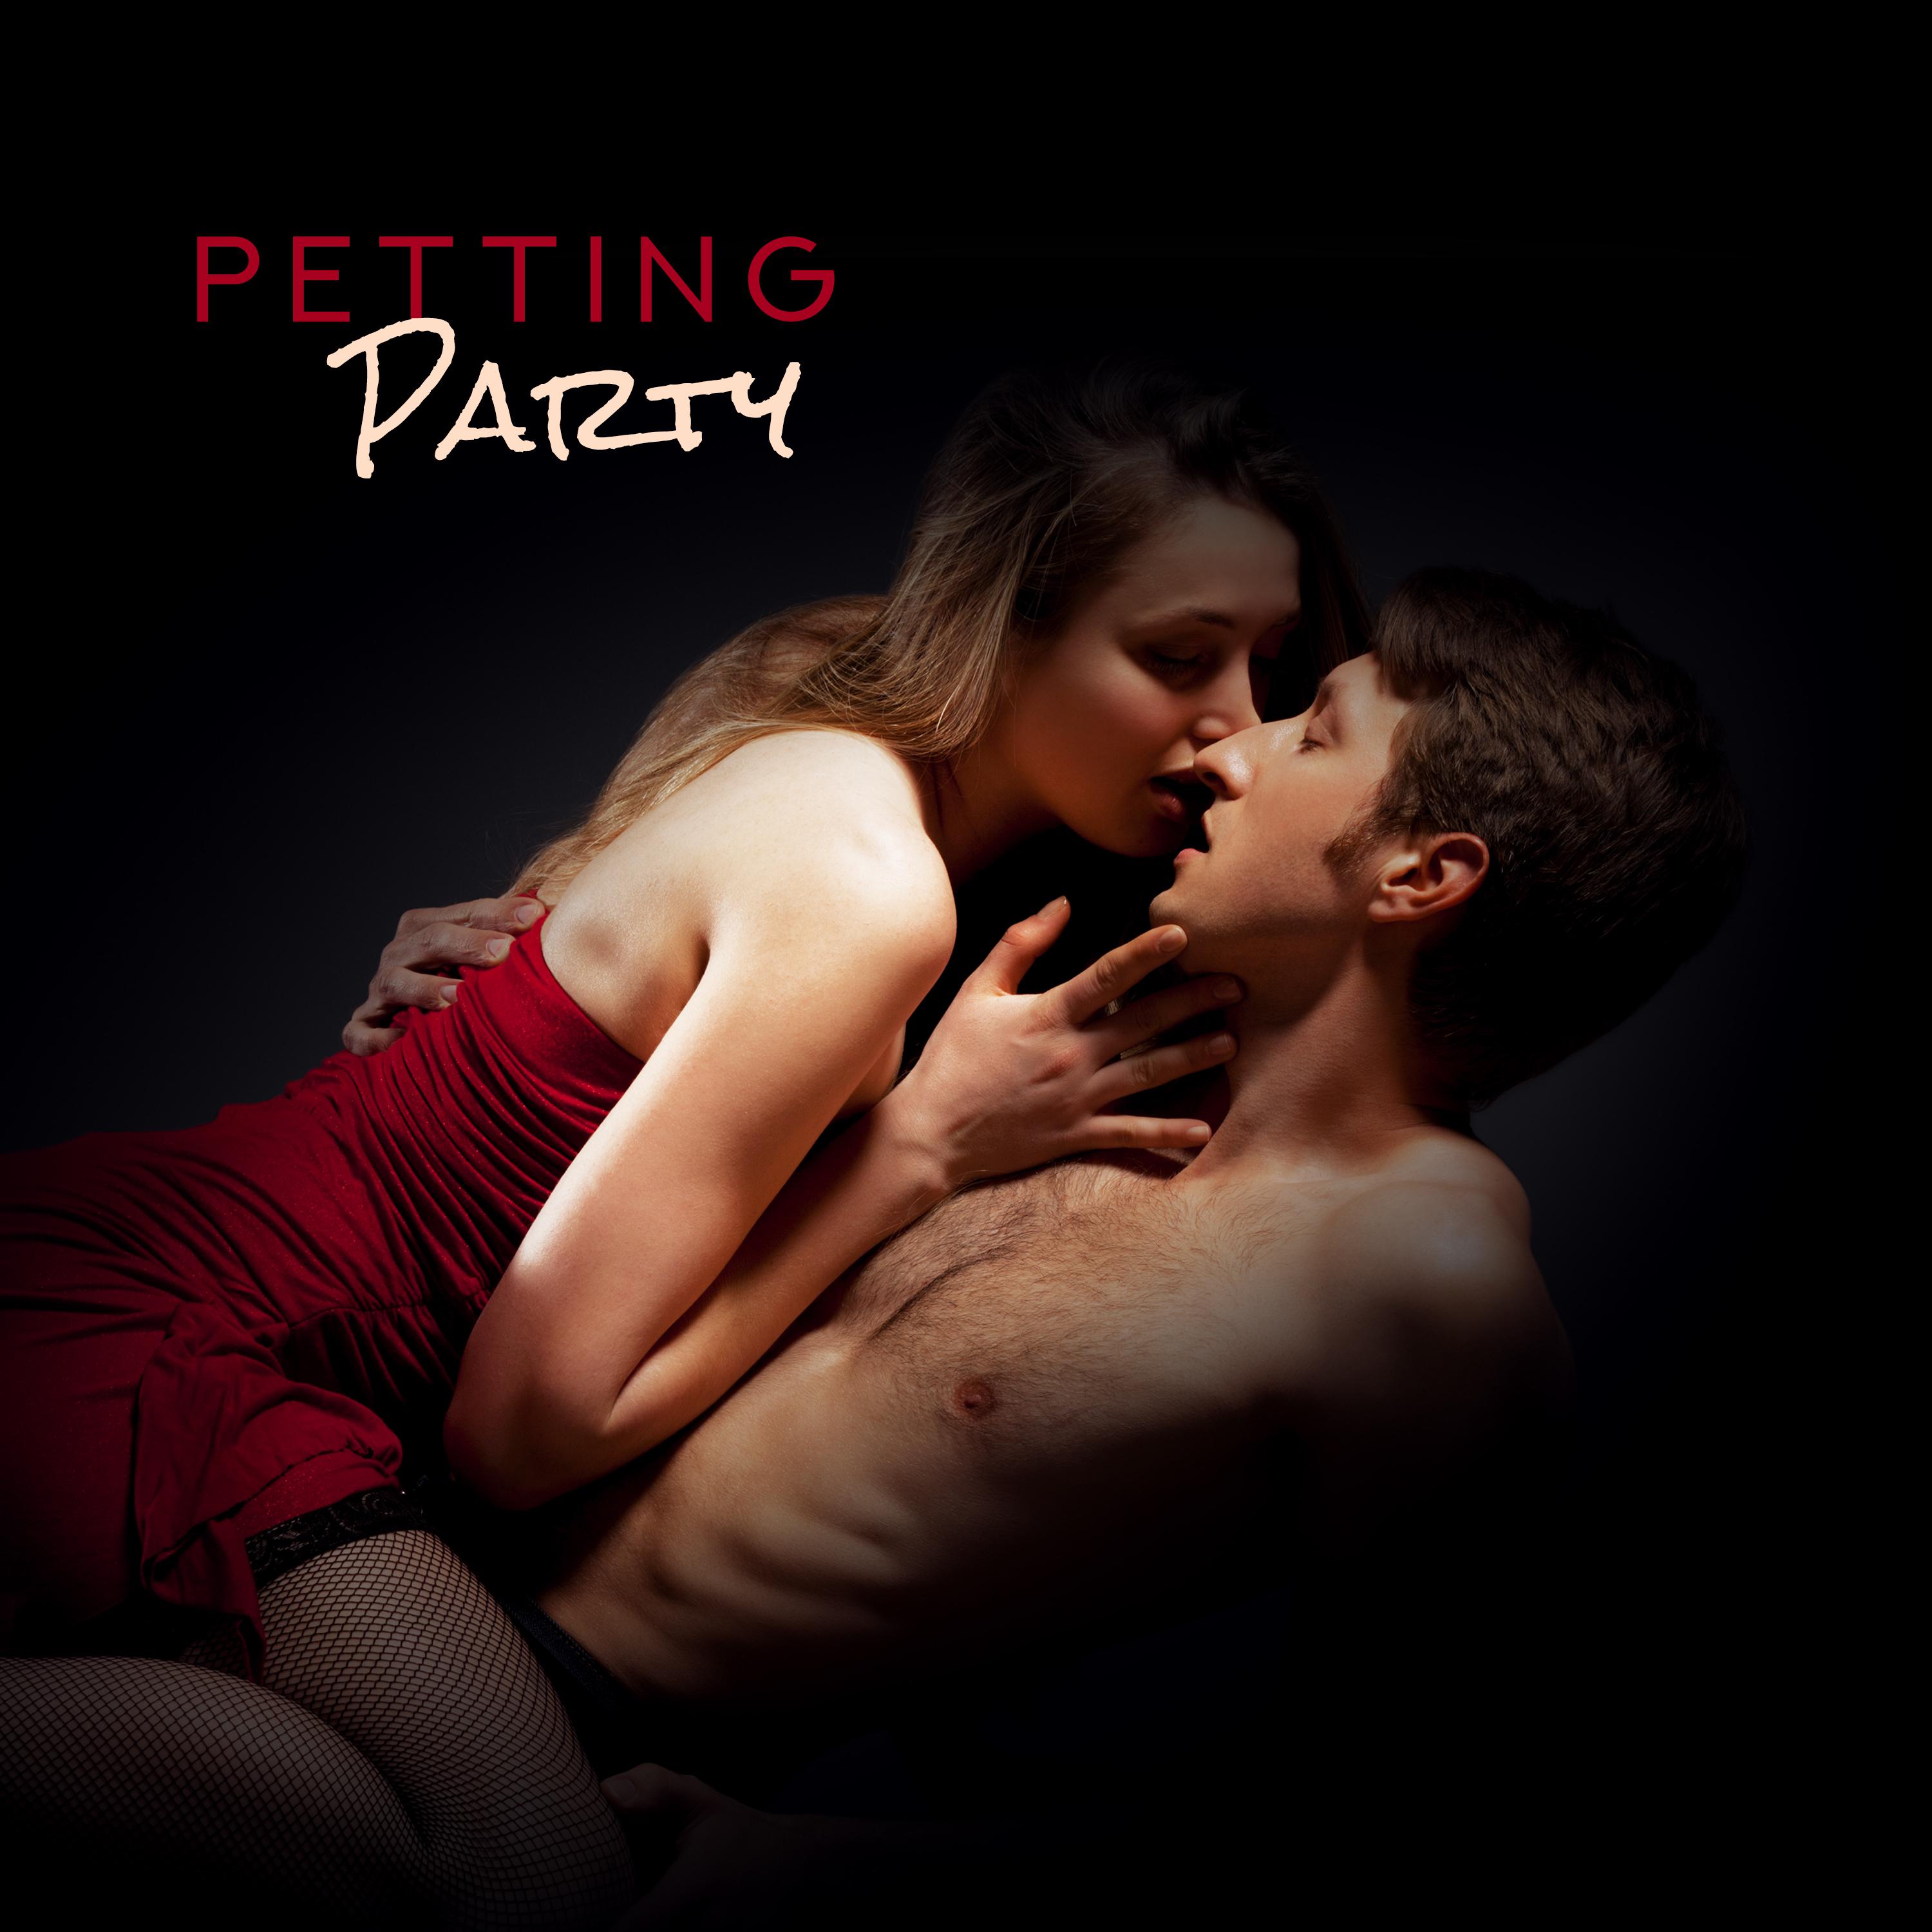 Petting Party - **** Songs from Nightclubs, Erotic Chillout Vibes, ****** Music Compilation